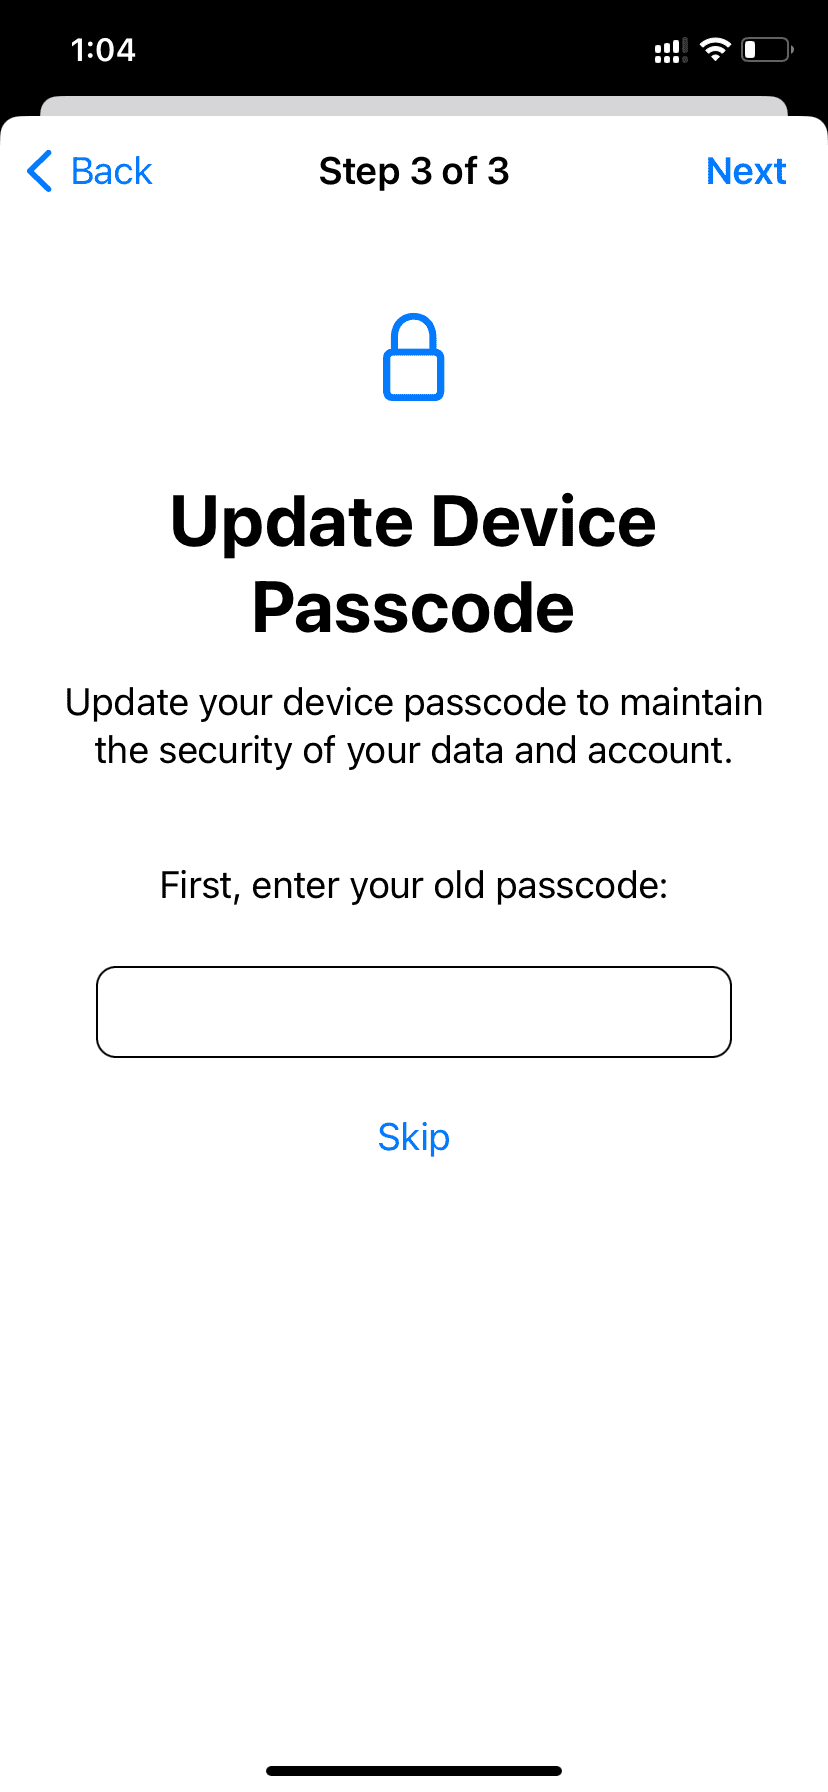 Update Device Passcode on Safety Check screen in iPhone settings